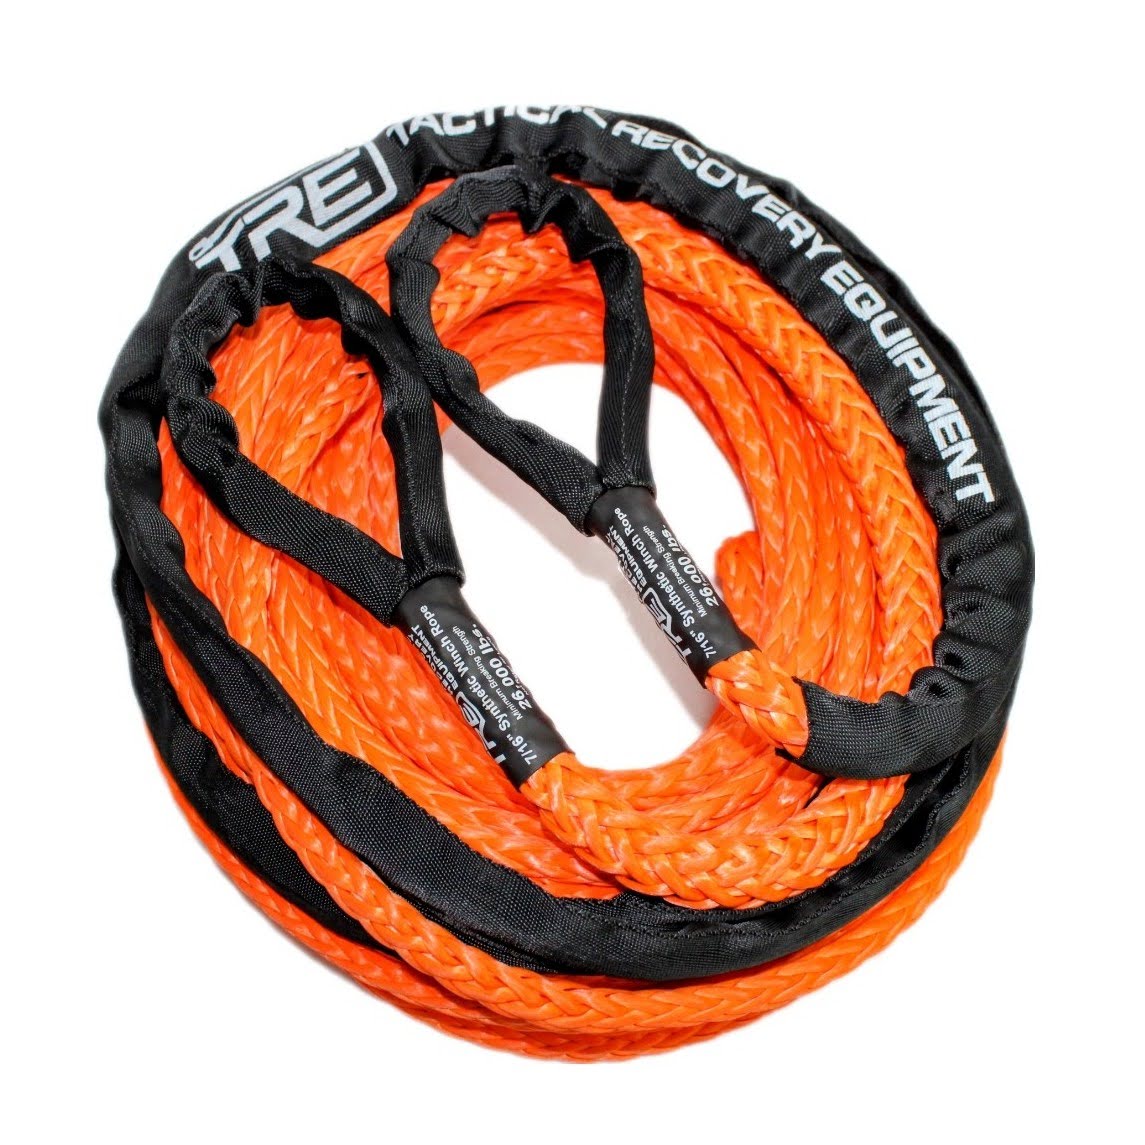 7/16 Winch Rope Extensions - 26,000 lb. Breaking Strength (Winch Rope Color: Orange, Winch Rope Length: 50 ft.)